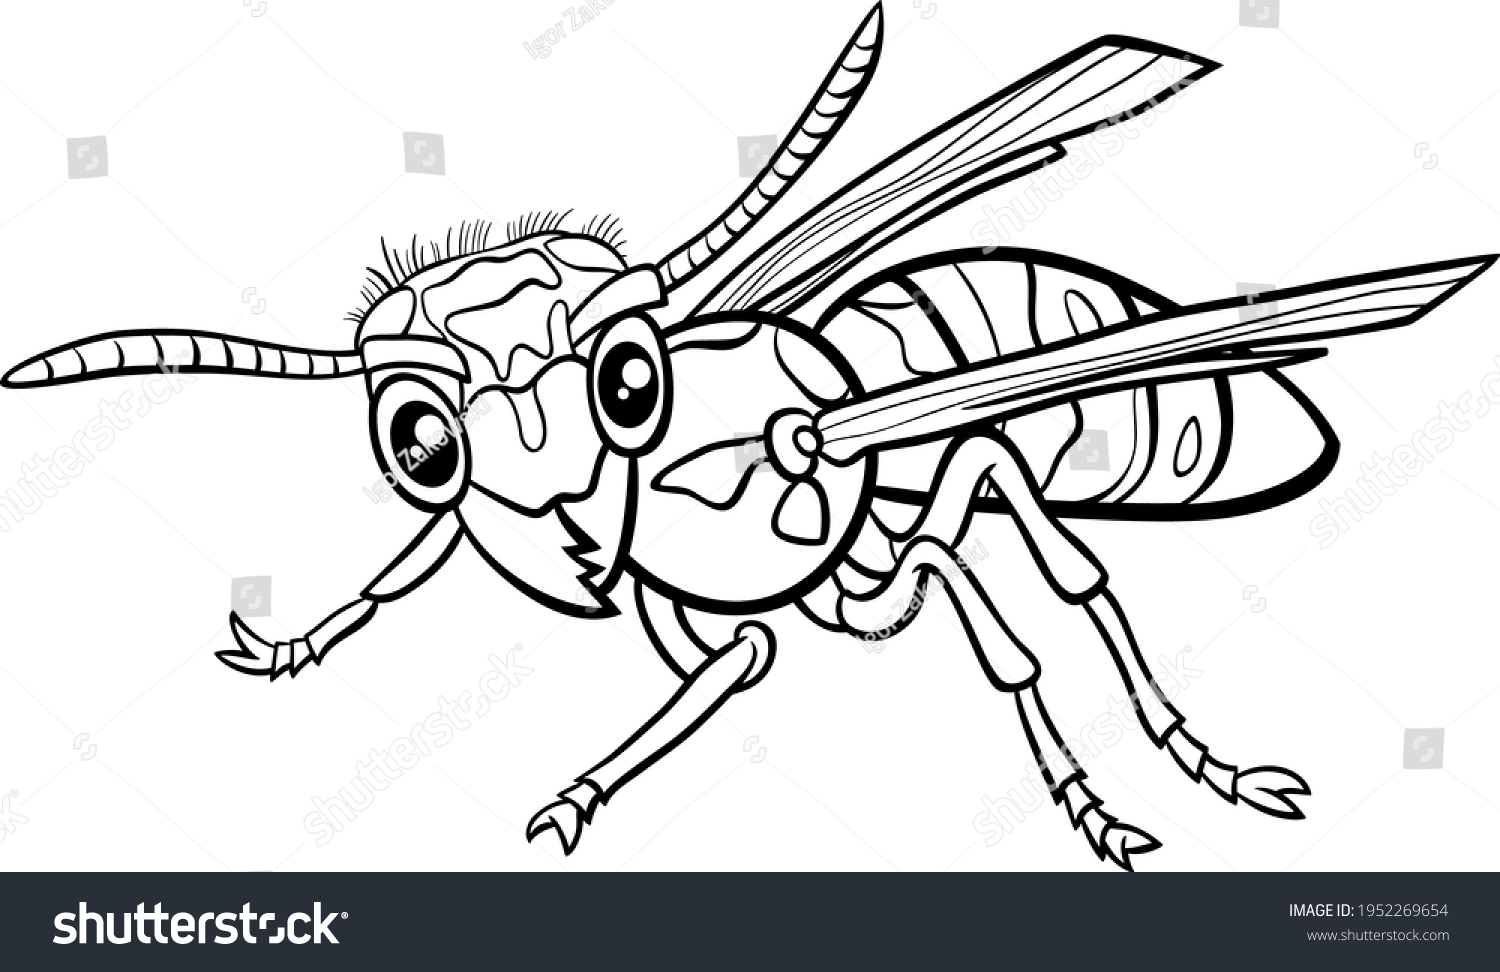 SVG of Black and white cartoon illustration of yellowjacket or wasp insect animal character coloring book page svg